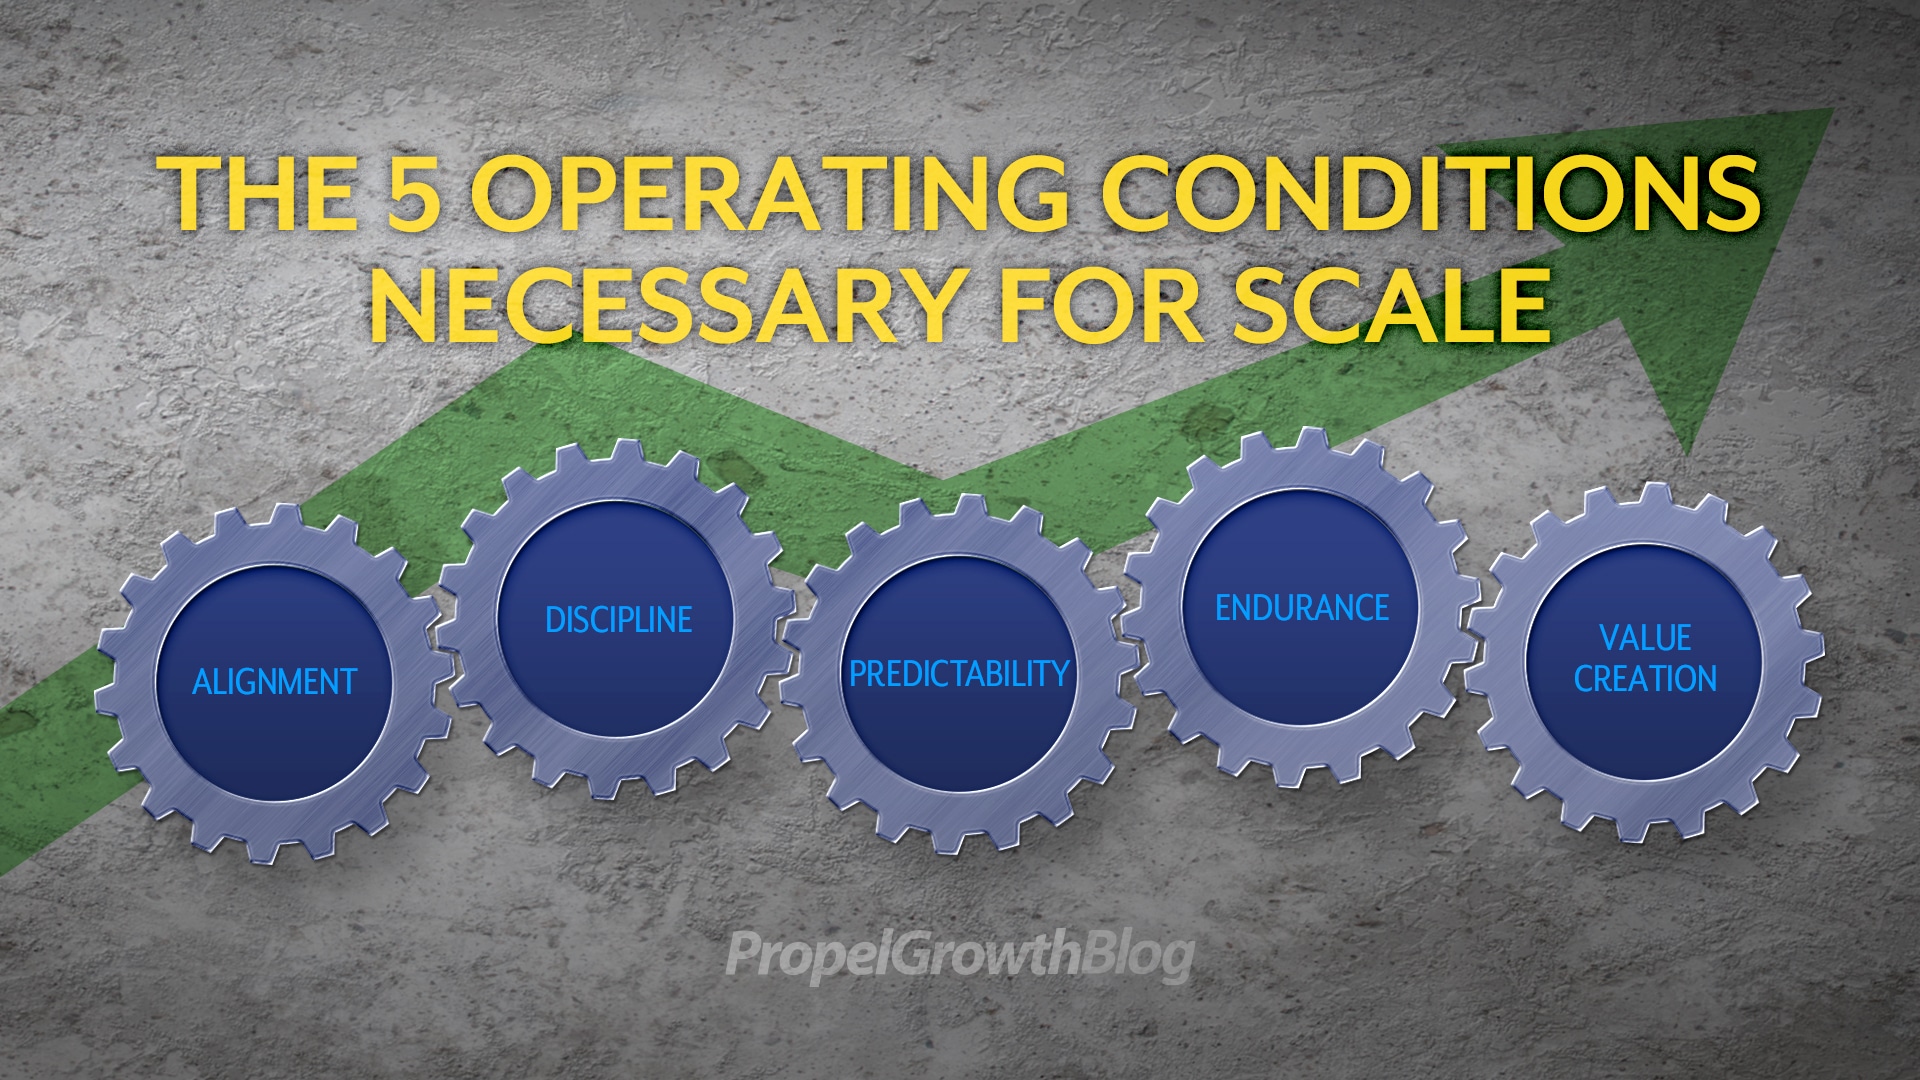 The 5 operating conditions necessary for scale - alignment, discipline, predictability, endurance, value creation